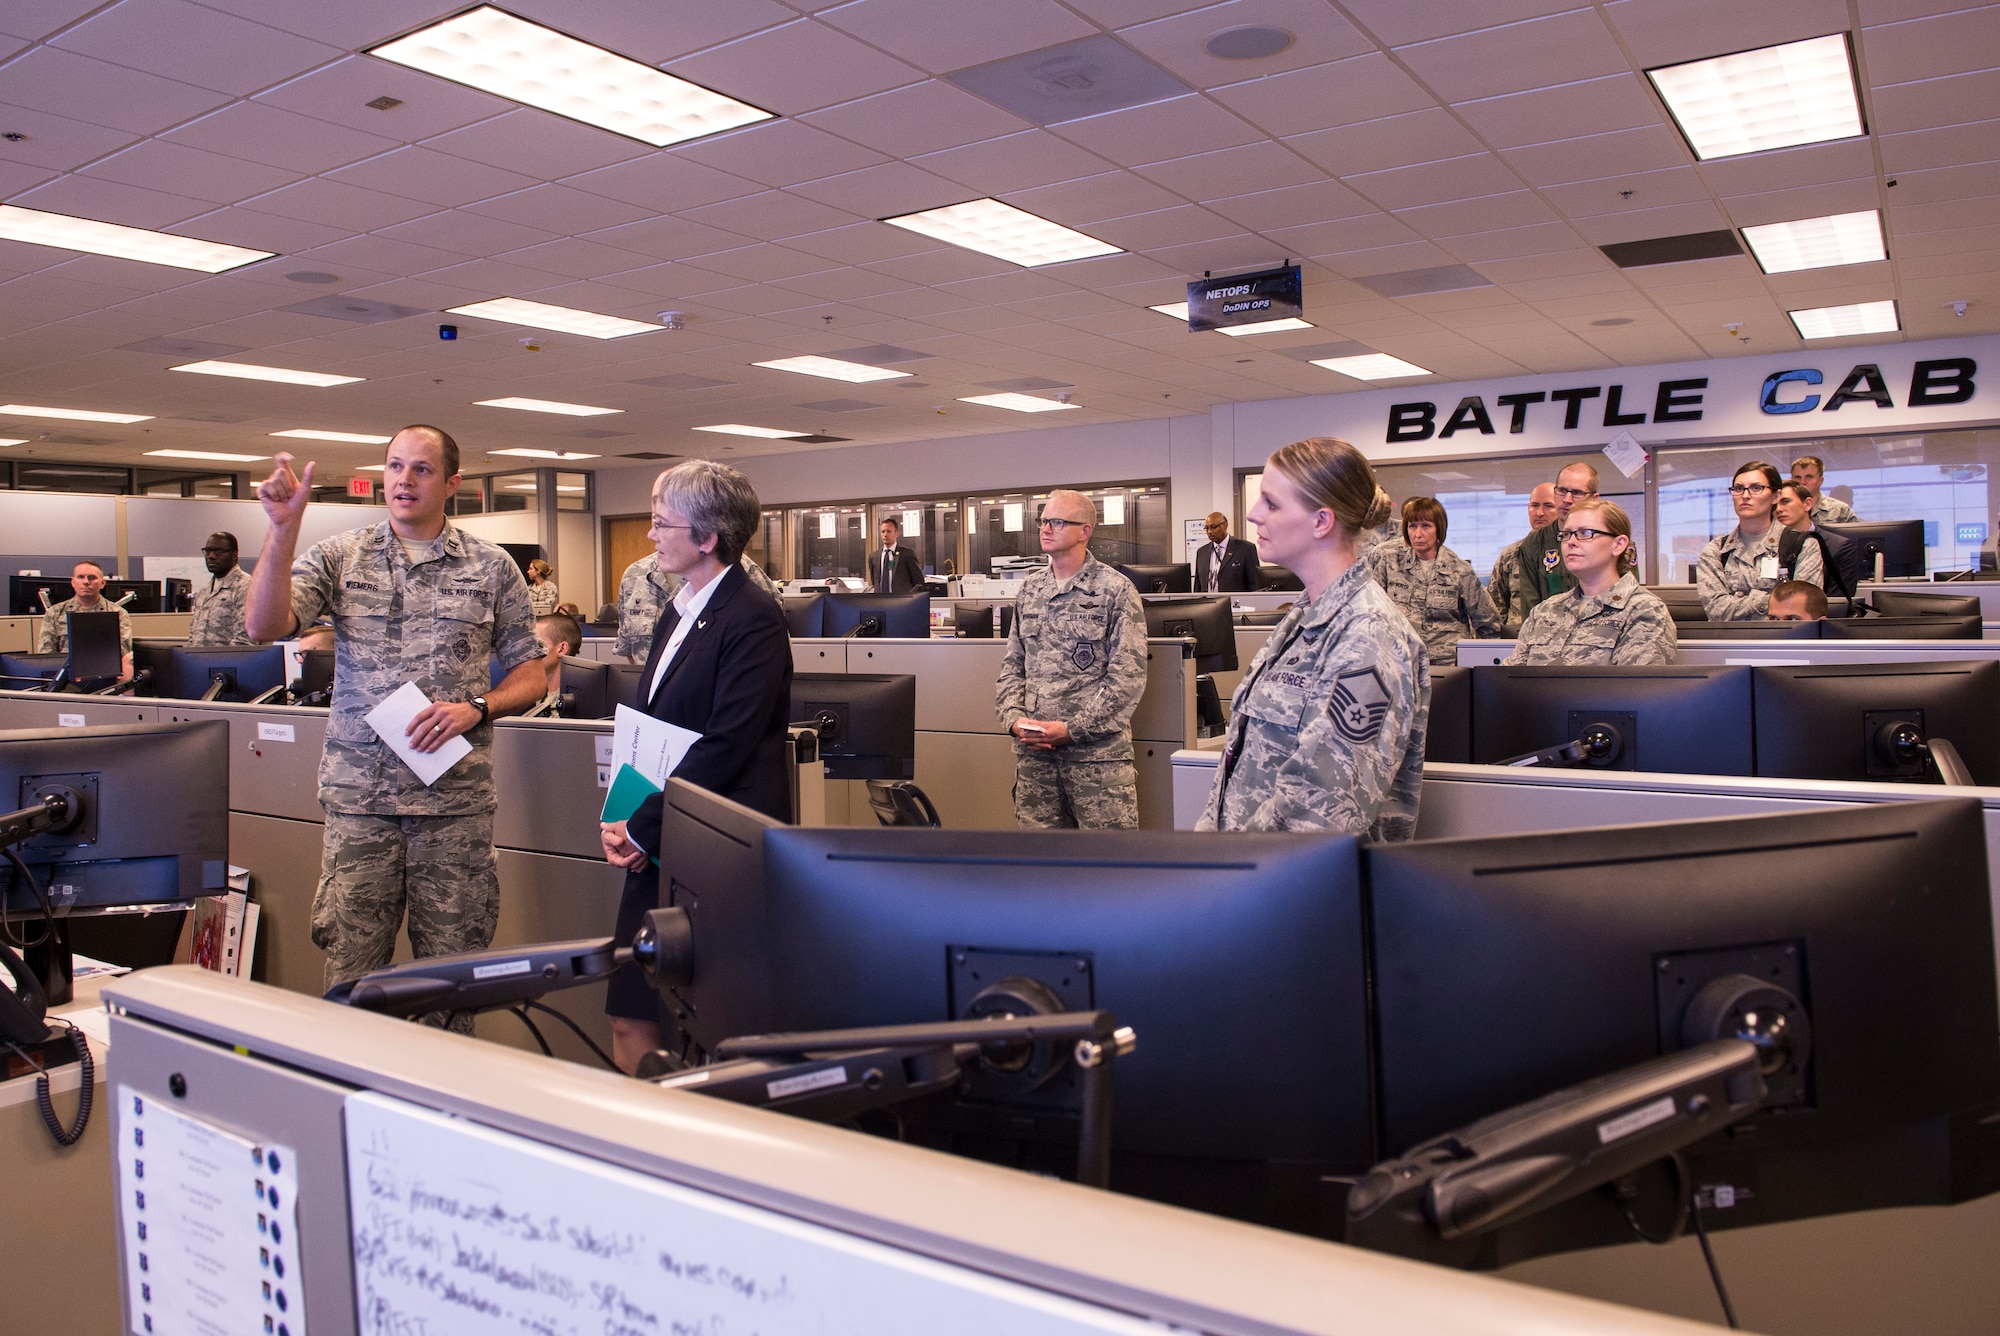 Capt. Benjamin Wiemers, 624th Operations Center plans chief, explains the 624th OC mission to Secretary of the Air Force Heather Wilson during her visit to Joint Base San Antonio-Lackland, Texas, June 28, 2018. During her visit, Wilson met Air Forces Cyber Airmen and learned about their contributions to the cyber mission. (U.S. Air Force photo by Tech. Sgt. R.J. Biermann)